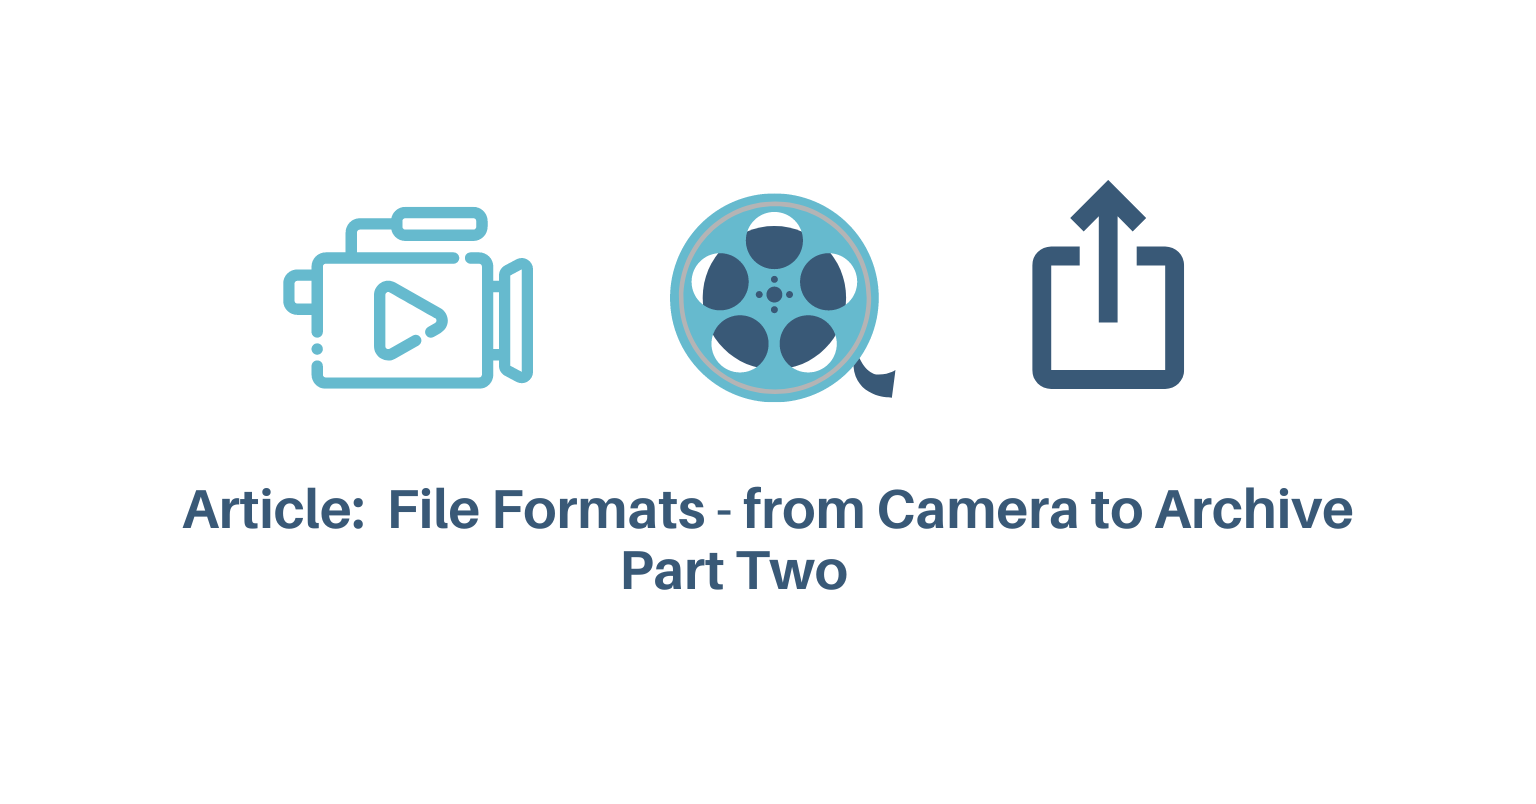 ARTICLE: VIDEO FILE FORMATS: FROM CAMERA TO ARCHIVE - PART TWO